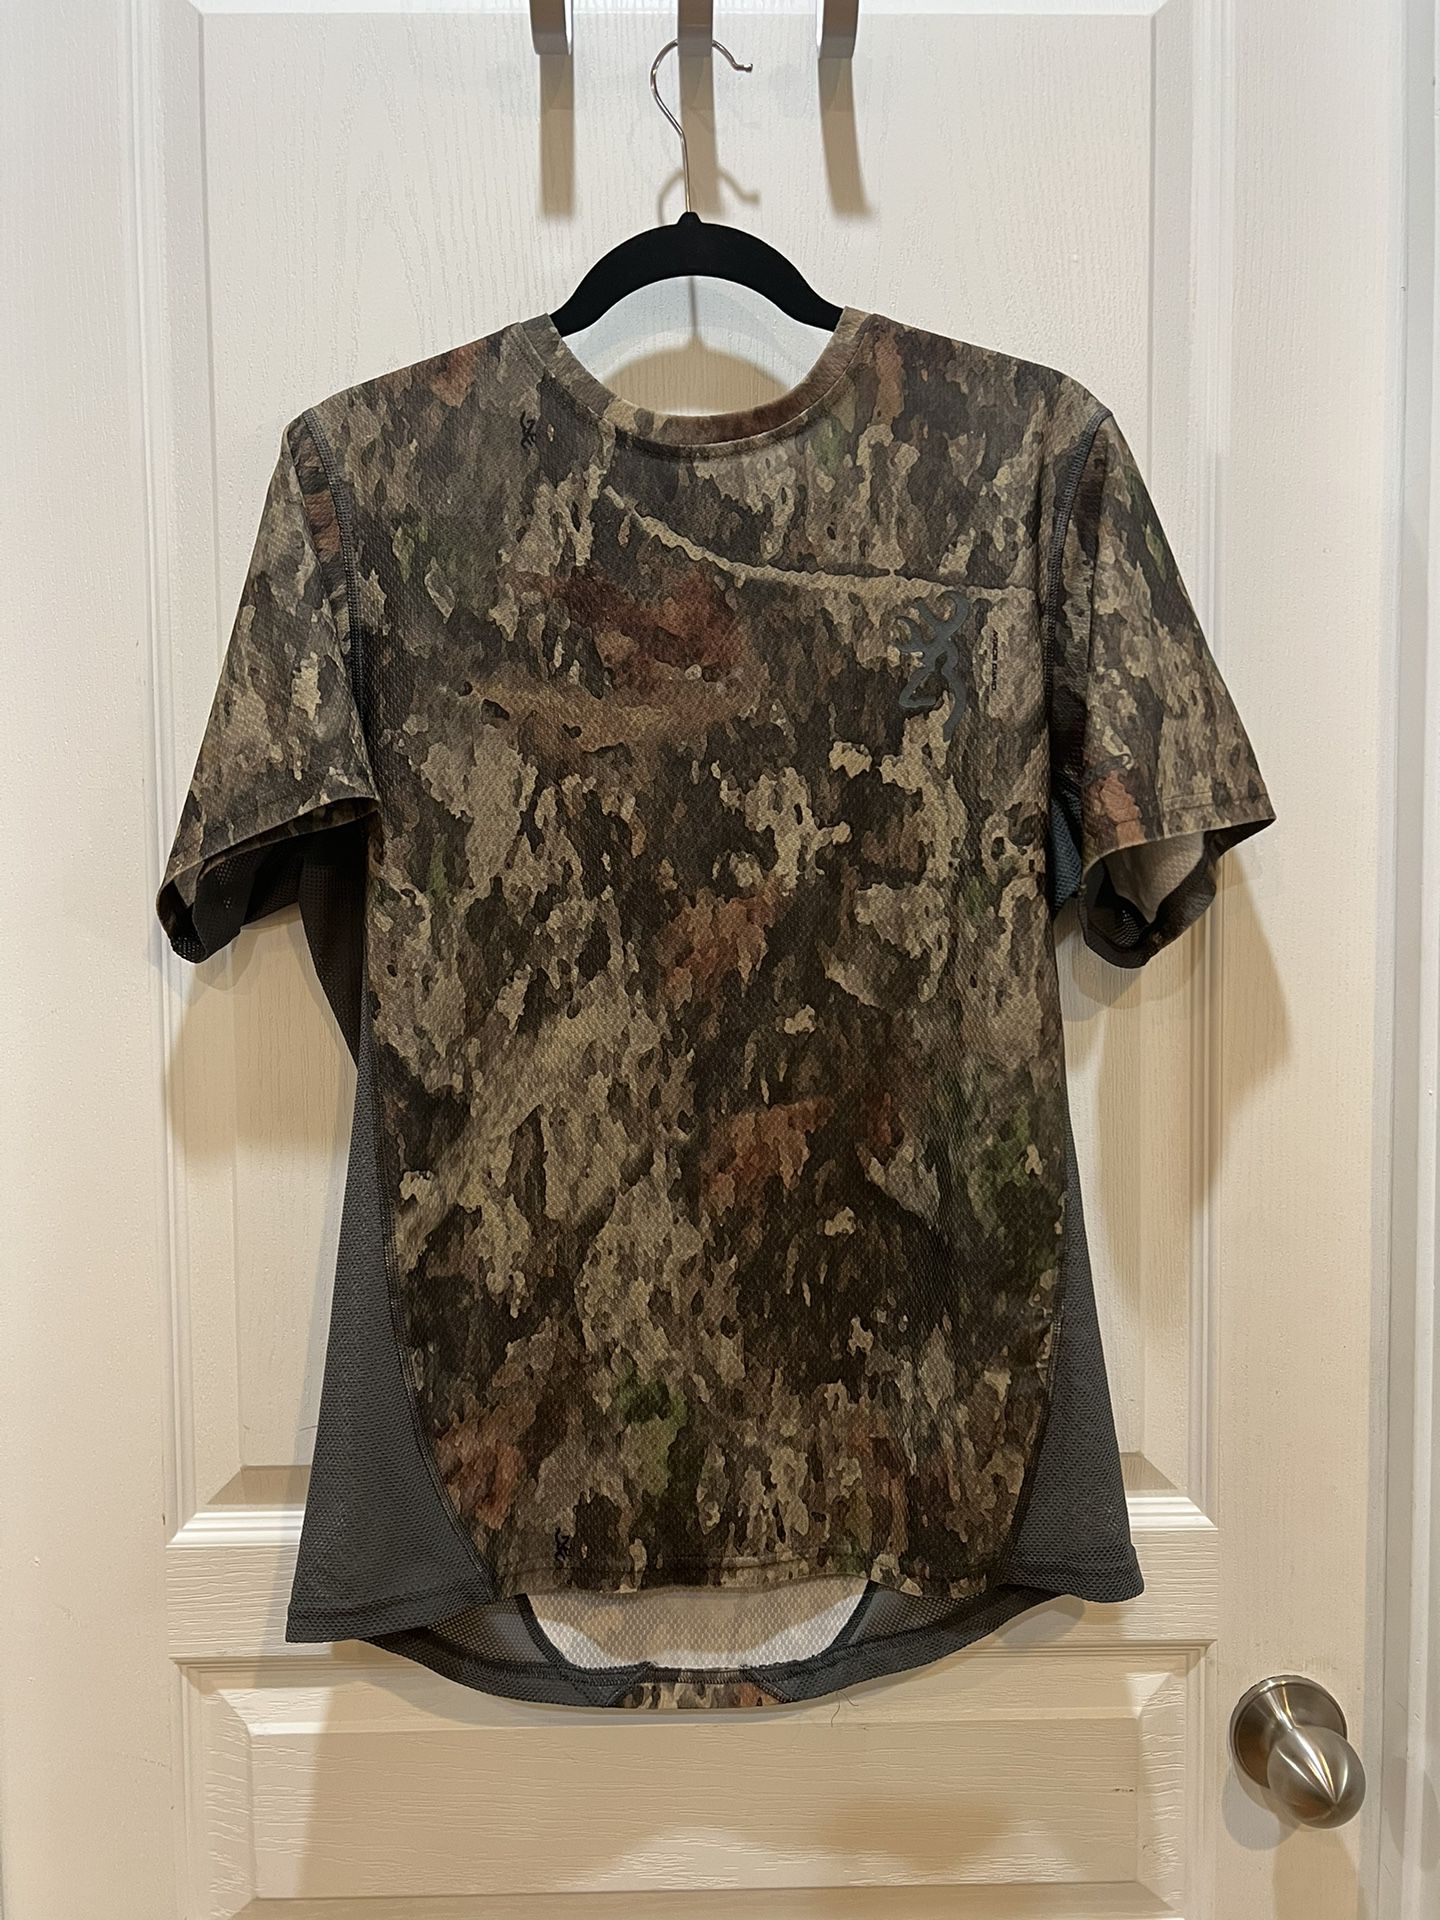 BROWNING A-TACS Camo Vented Crew Neck T-Shirt MEDIUM (Good condition) PICK UP IN CORNELIUS